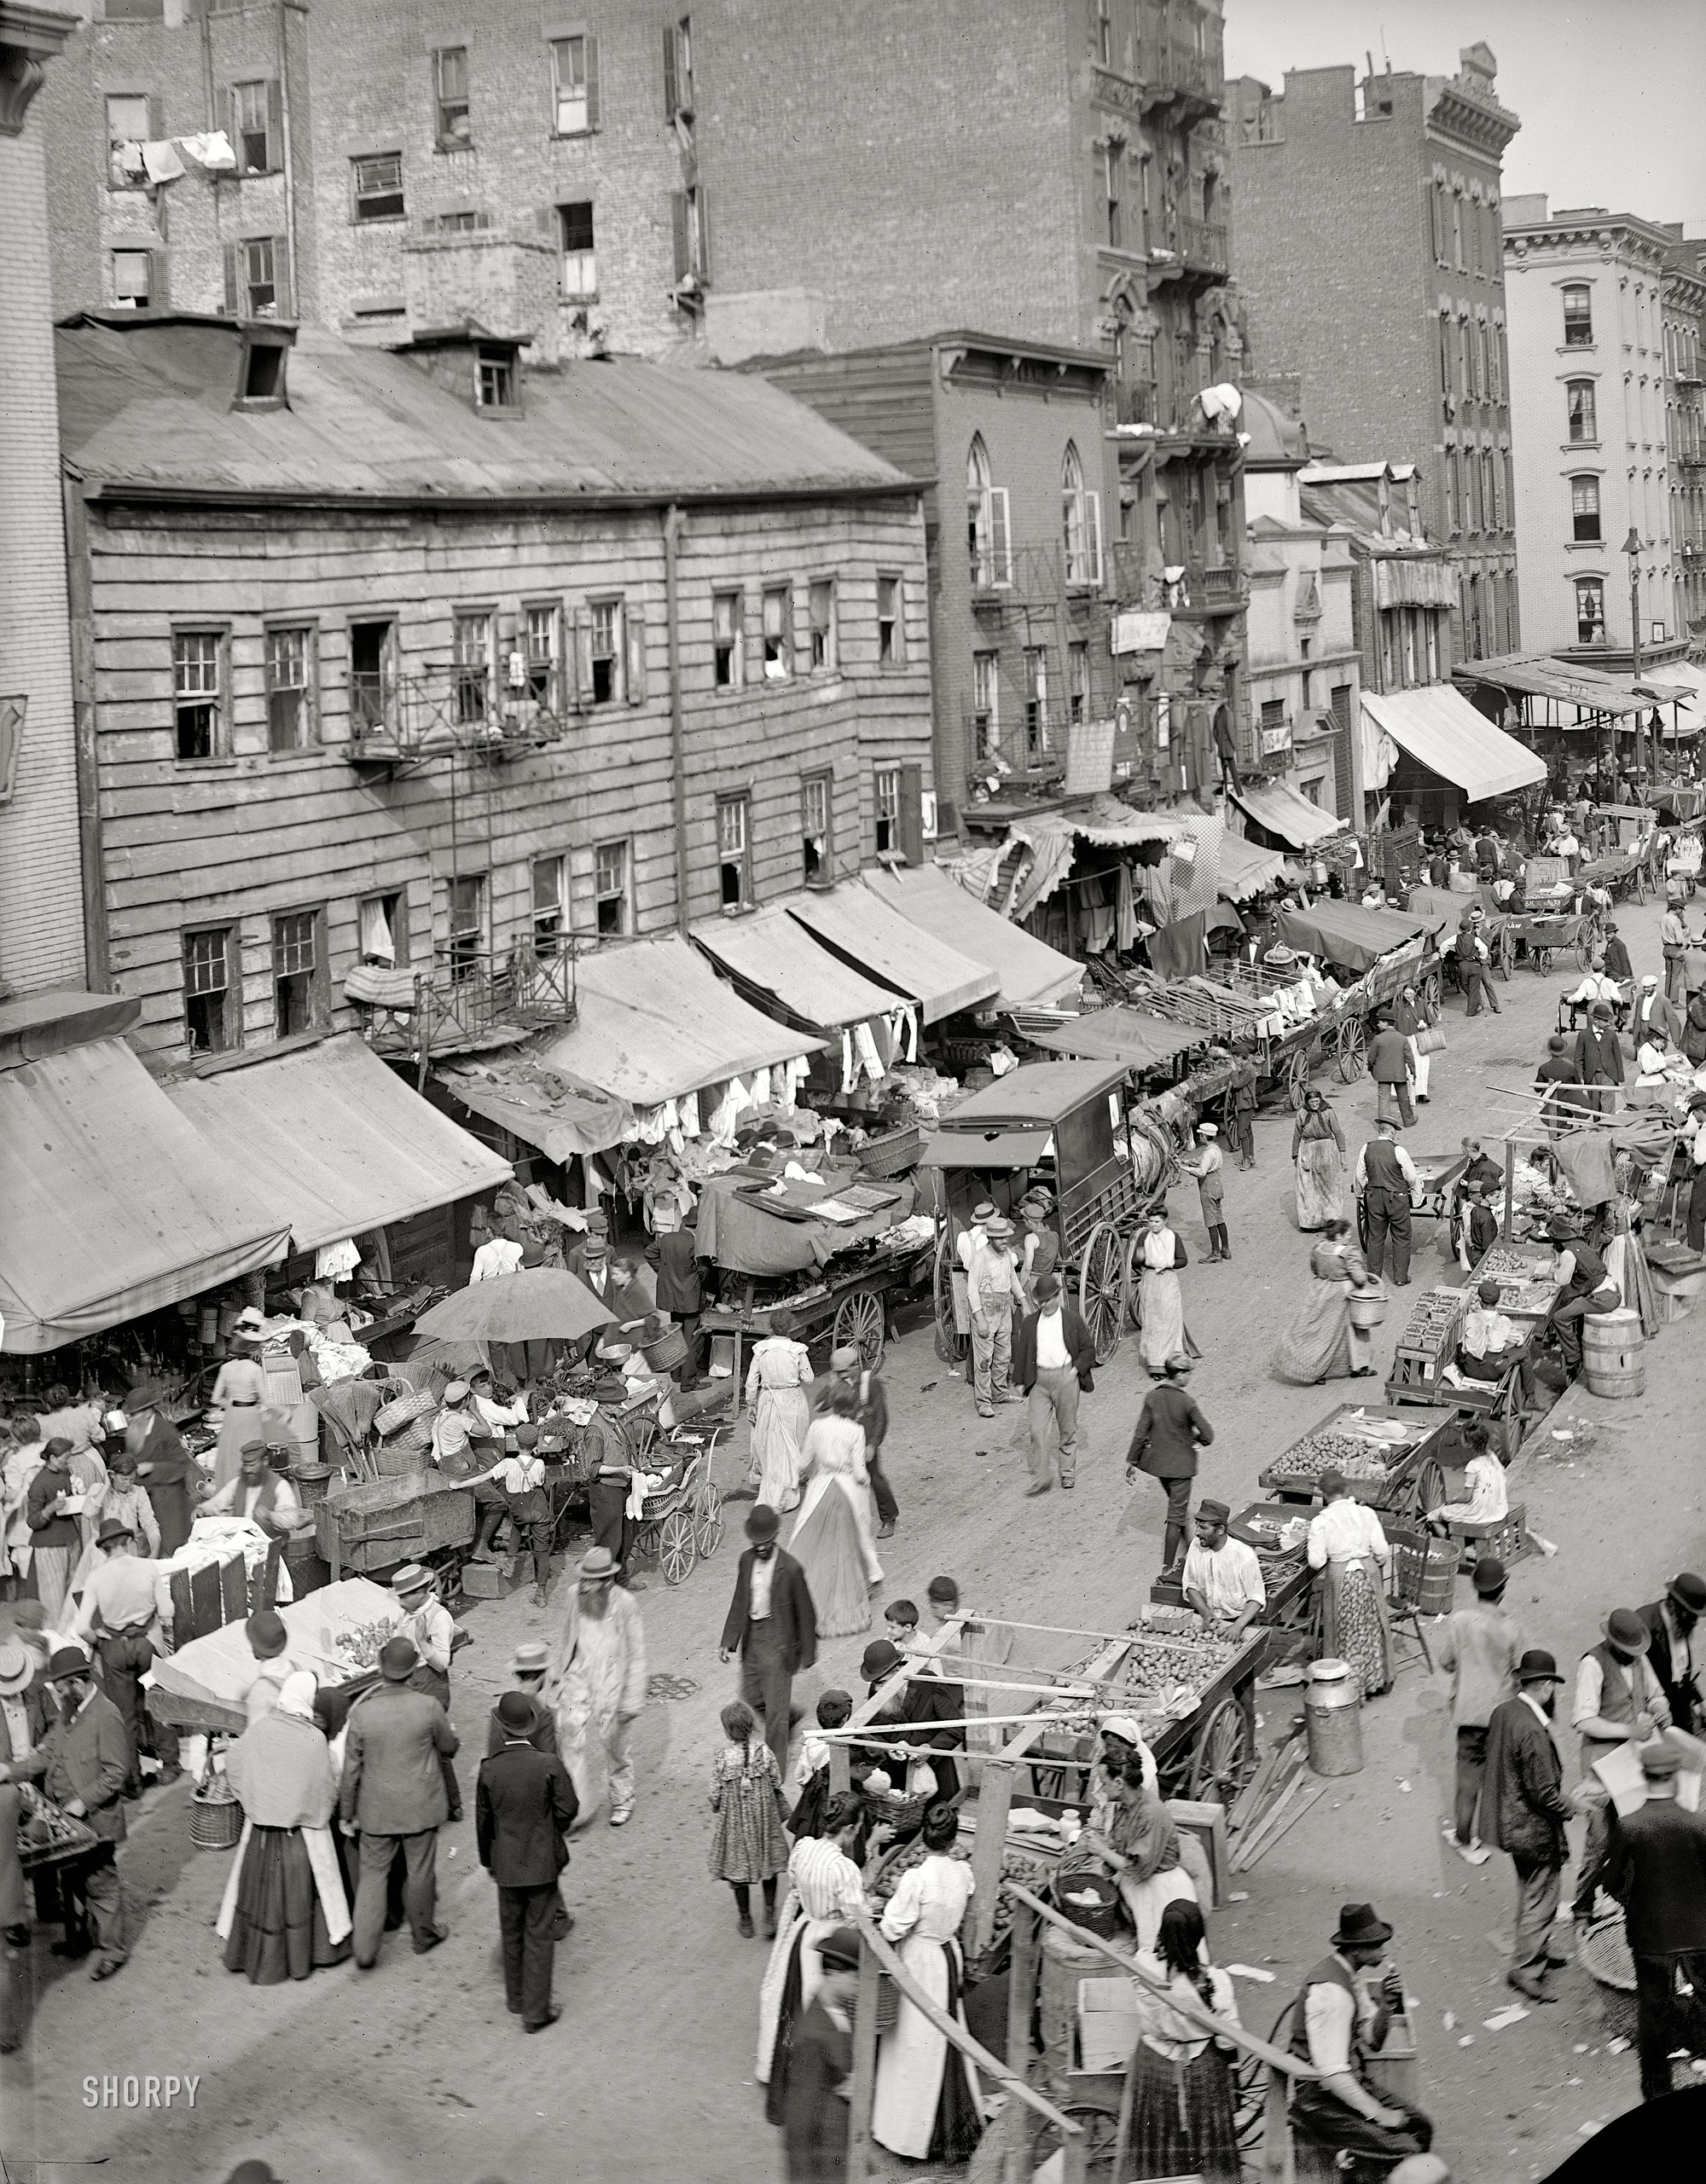 New York City circa 1900. "Jewish market on the East Side." 8x10 inch dry plate glass negative, Detroit Publishing Company. View full size.